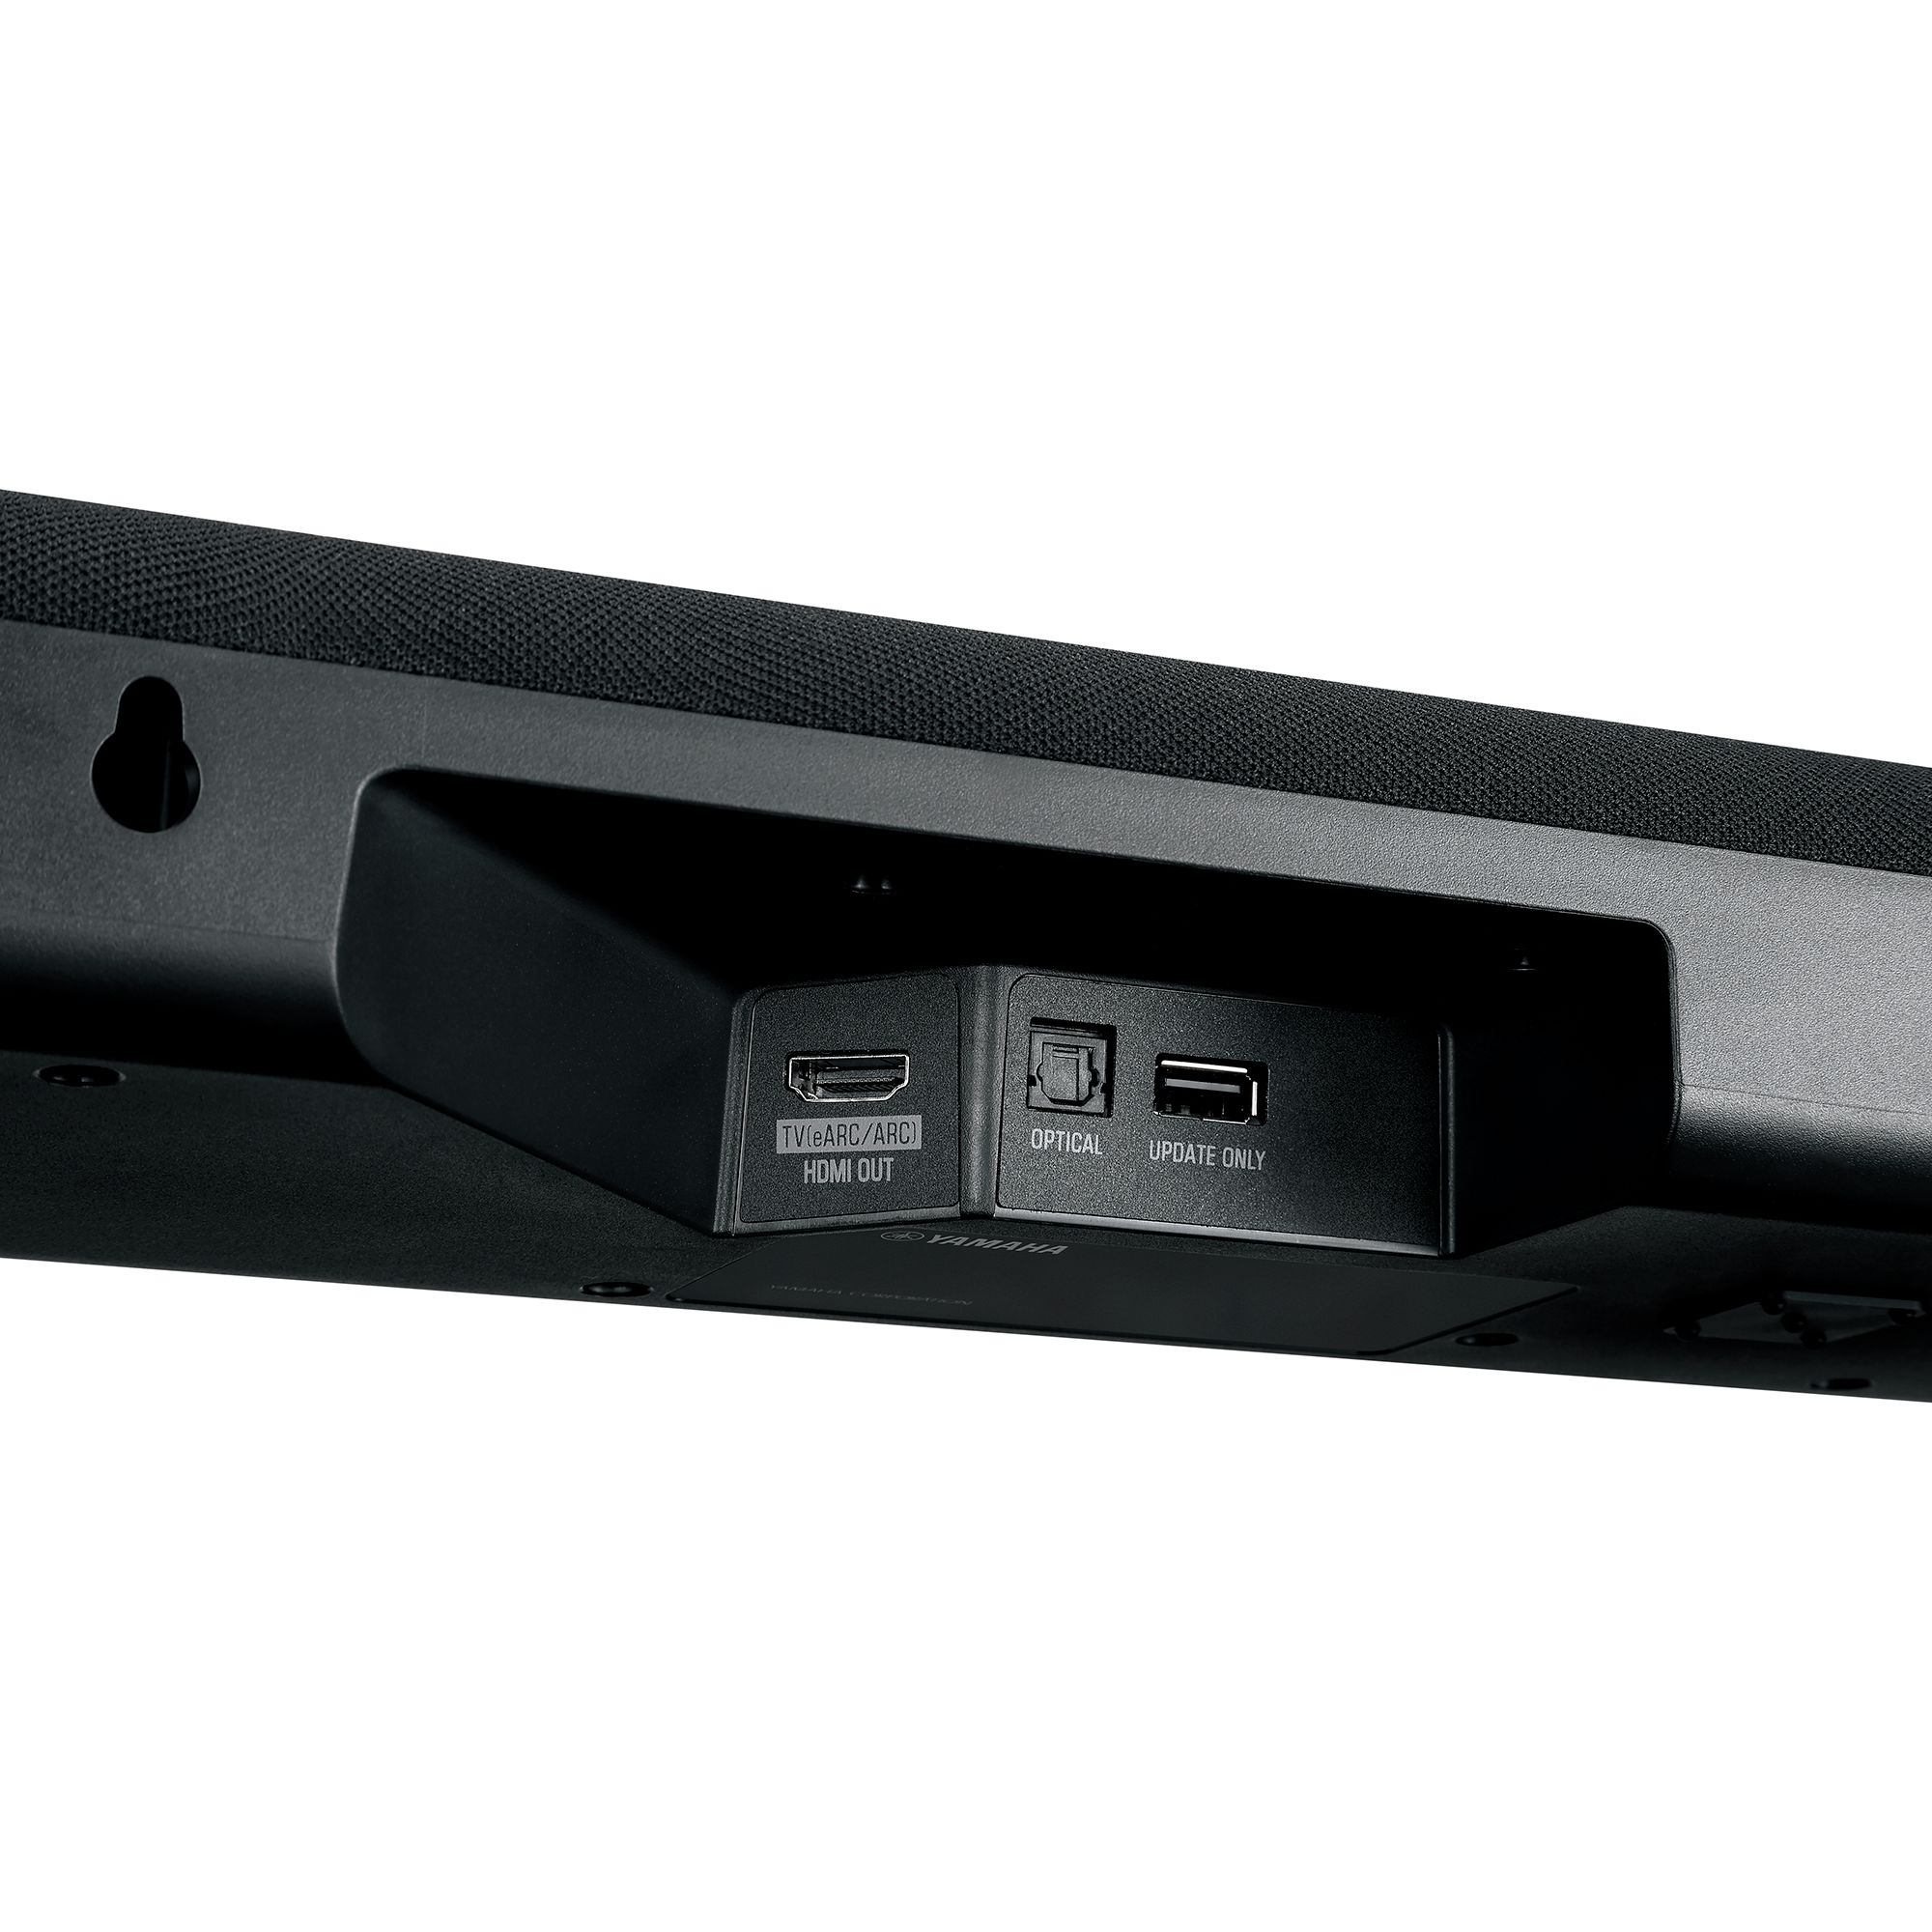 SR-B40A - Overview - Sound Bars - Audio & Visual - Products 